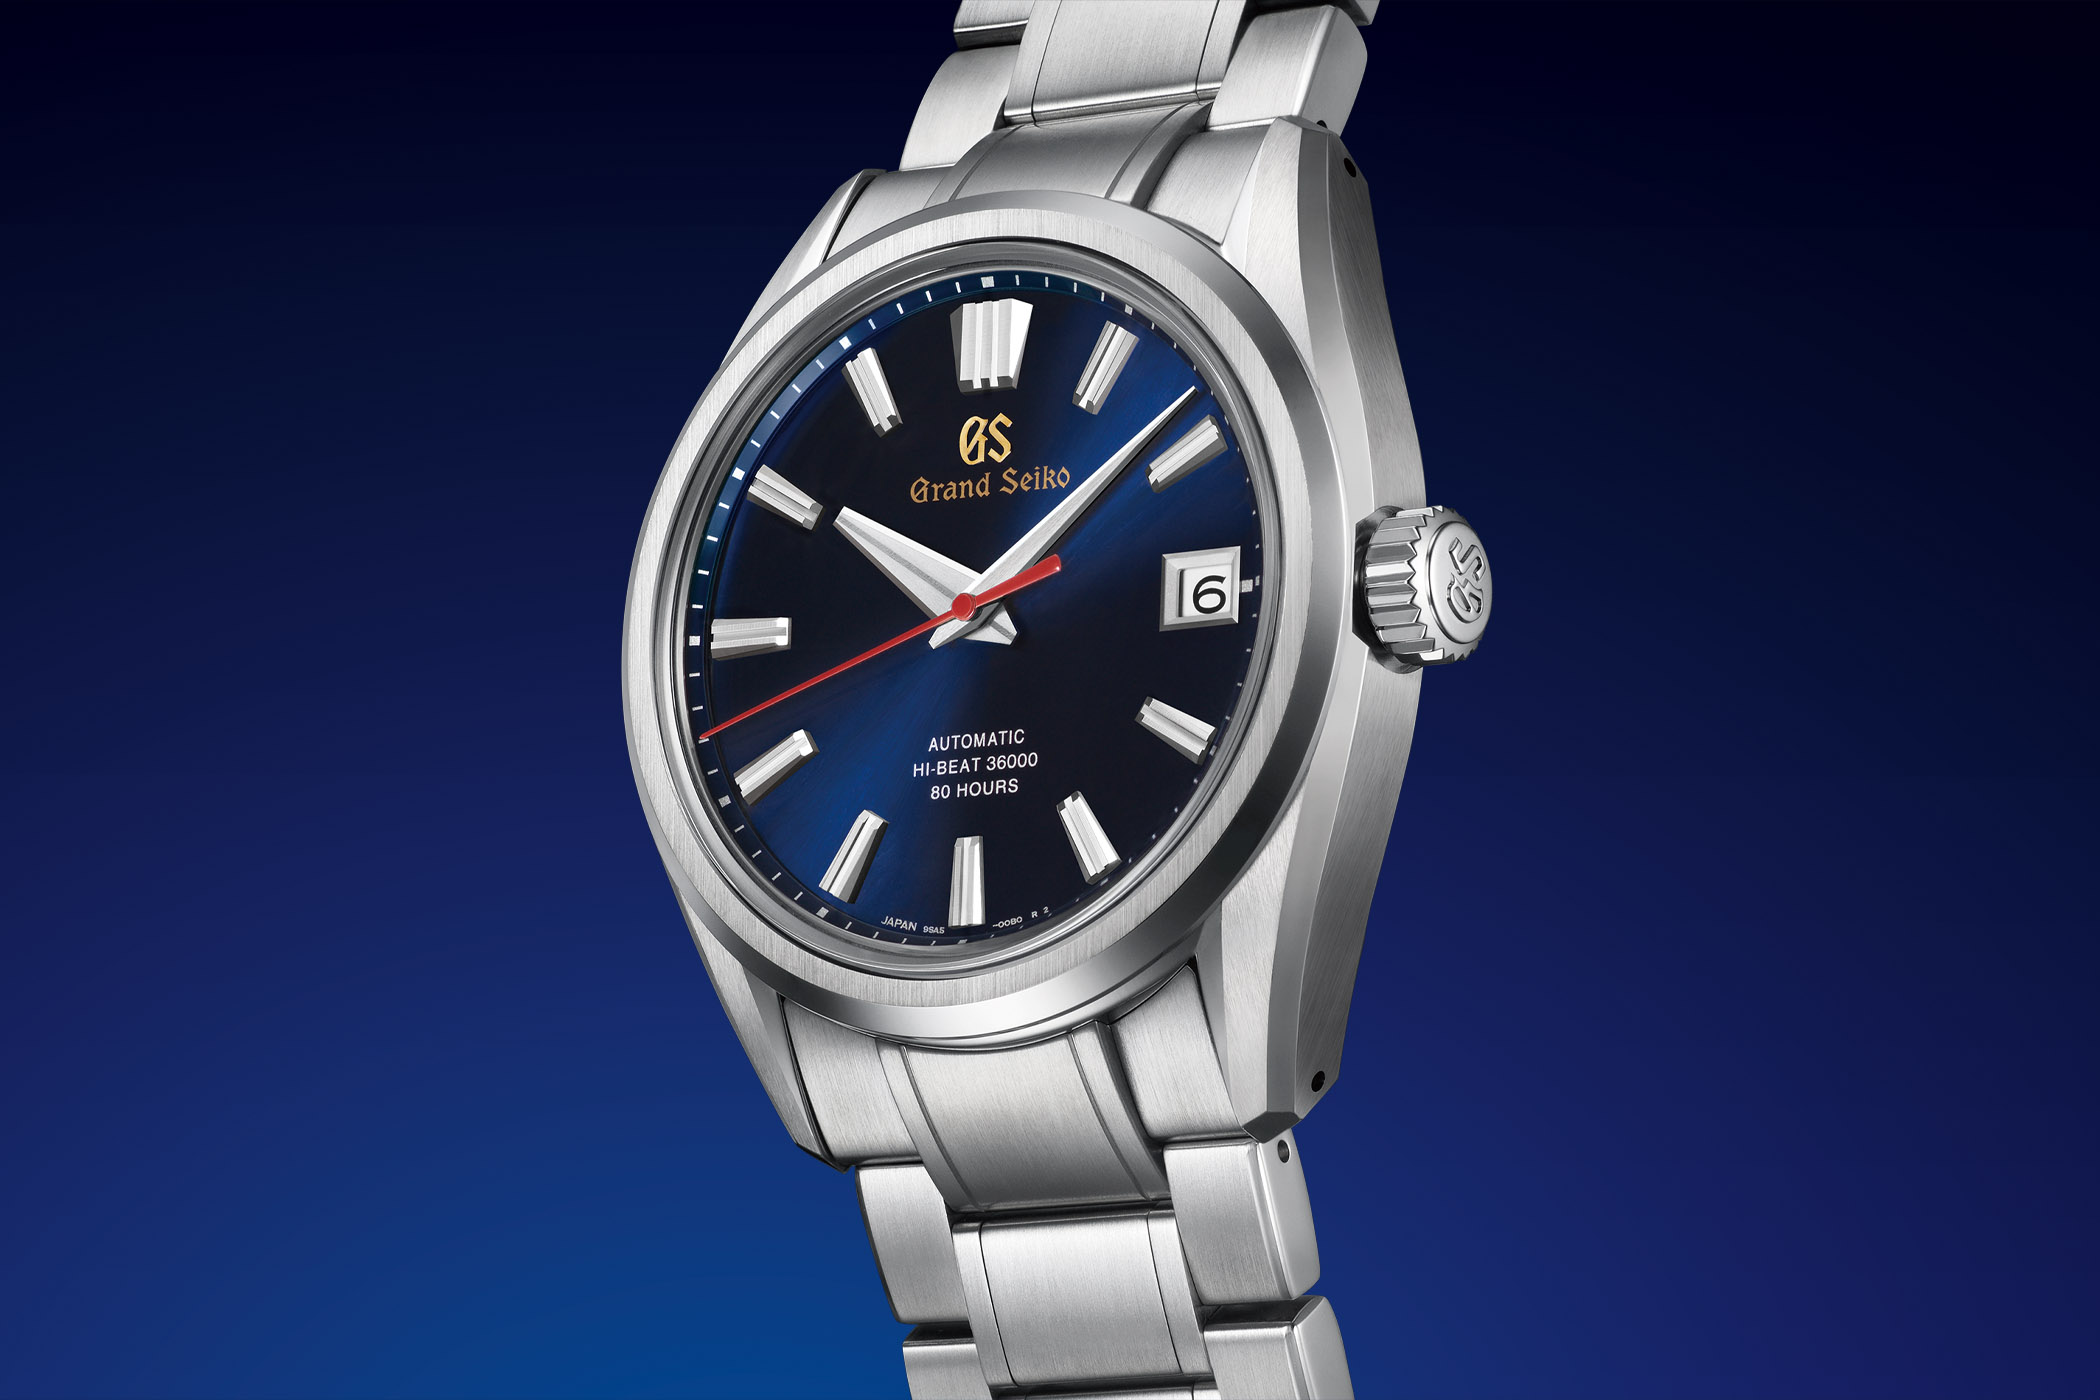 Introducing The Grand Seiko 60th Anniversary SLGH003 Limited Edition Watch